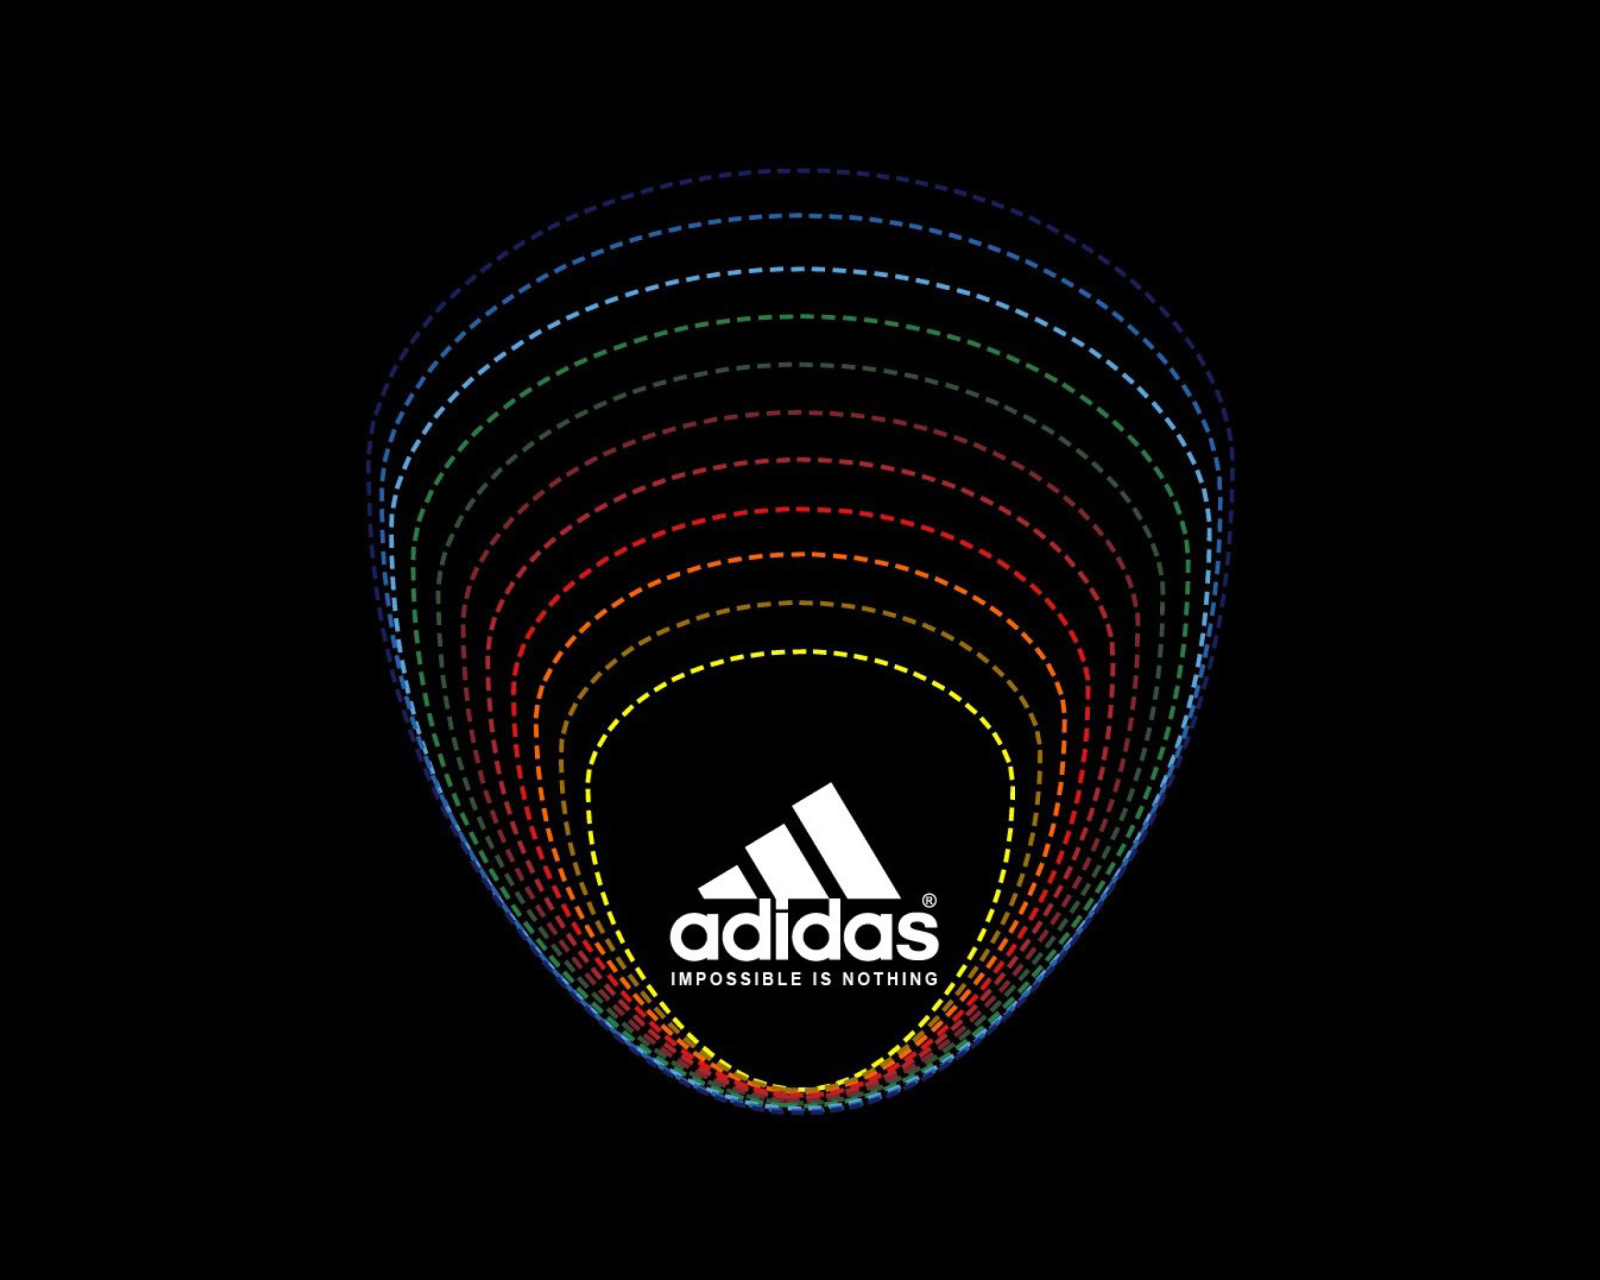 Adidas Tagline, Impossible is Nothing screenshot #1 1600x1280